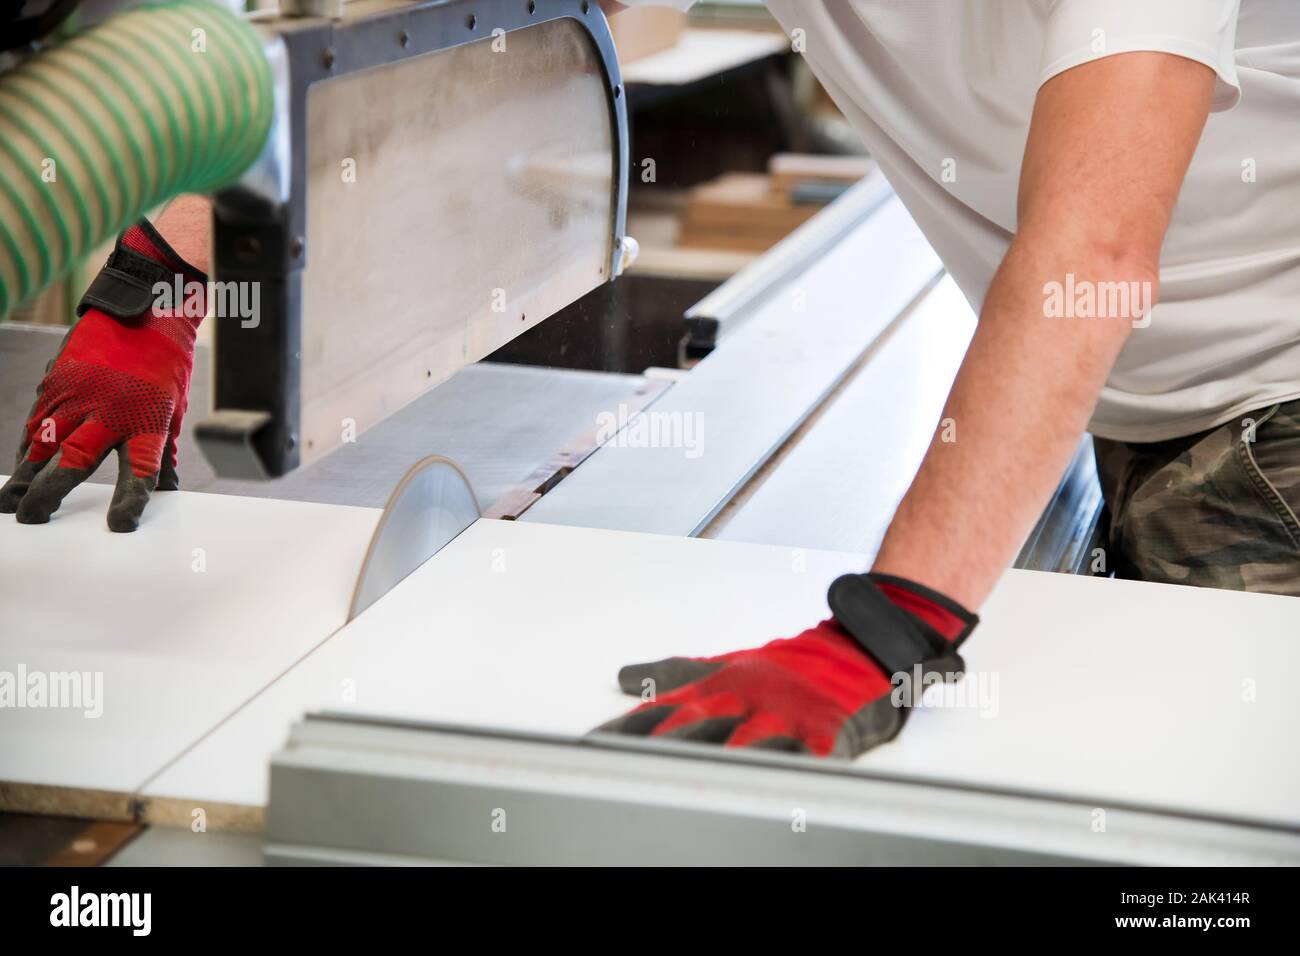 Hands of a carpenter using a circular saw in a workshop guiding a wooden board past the blade Stock Photo